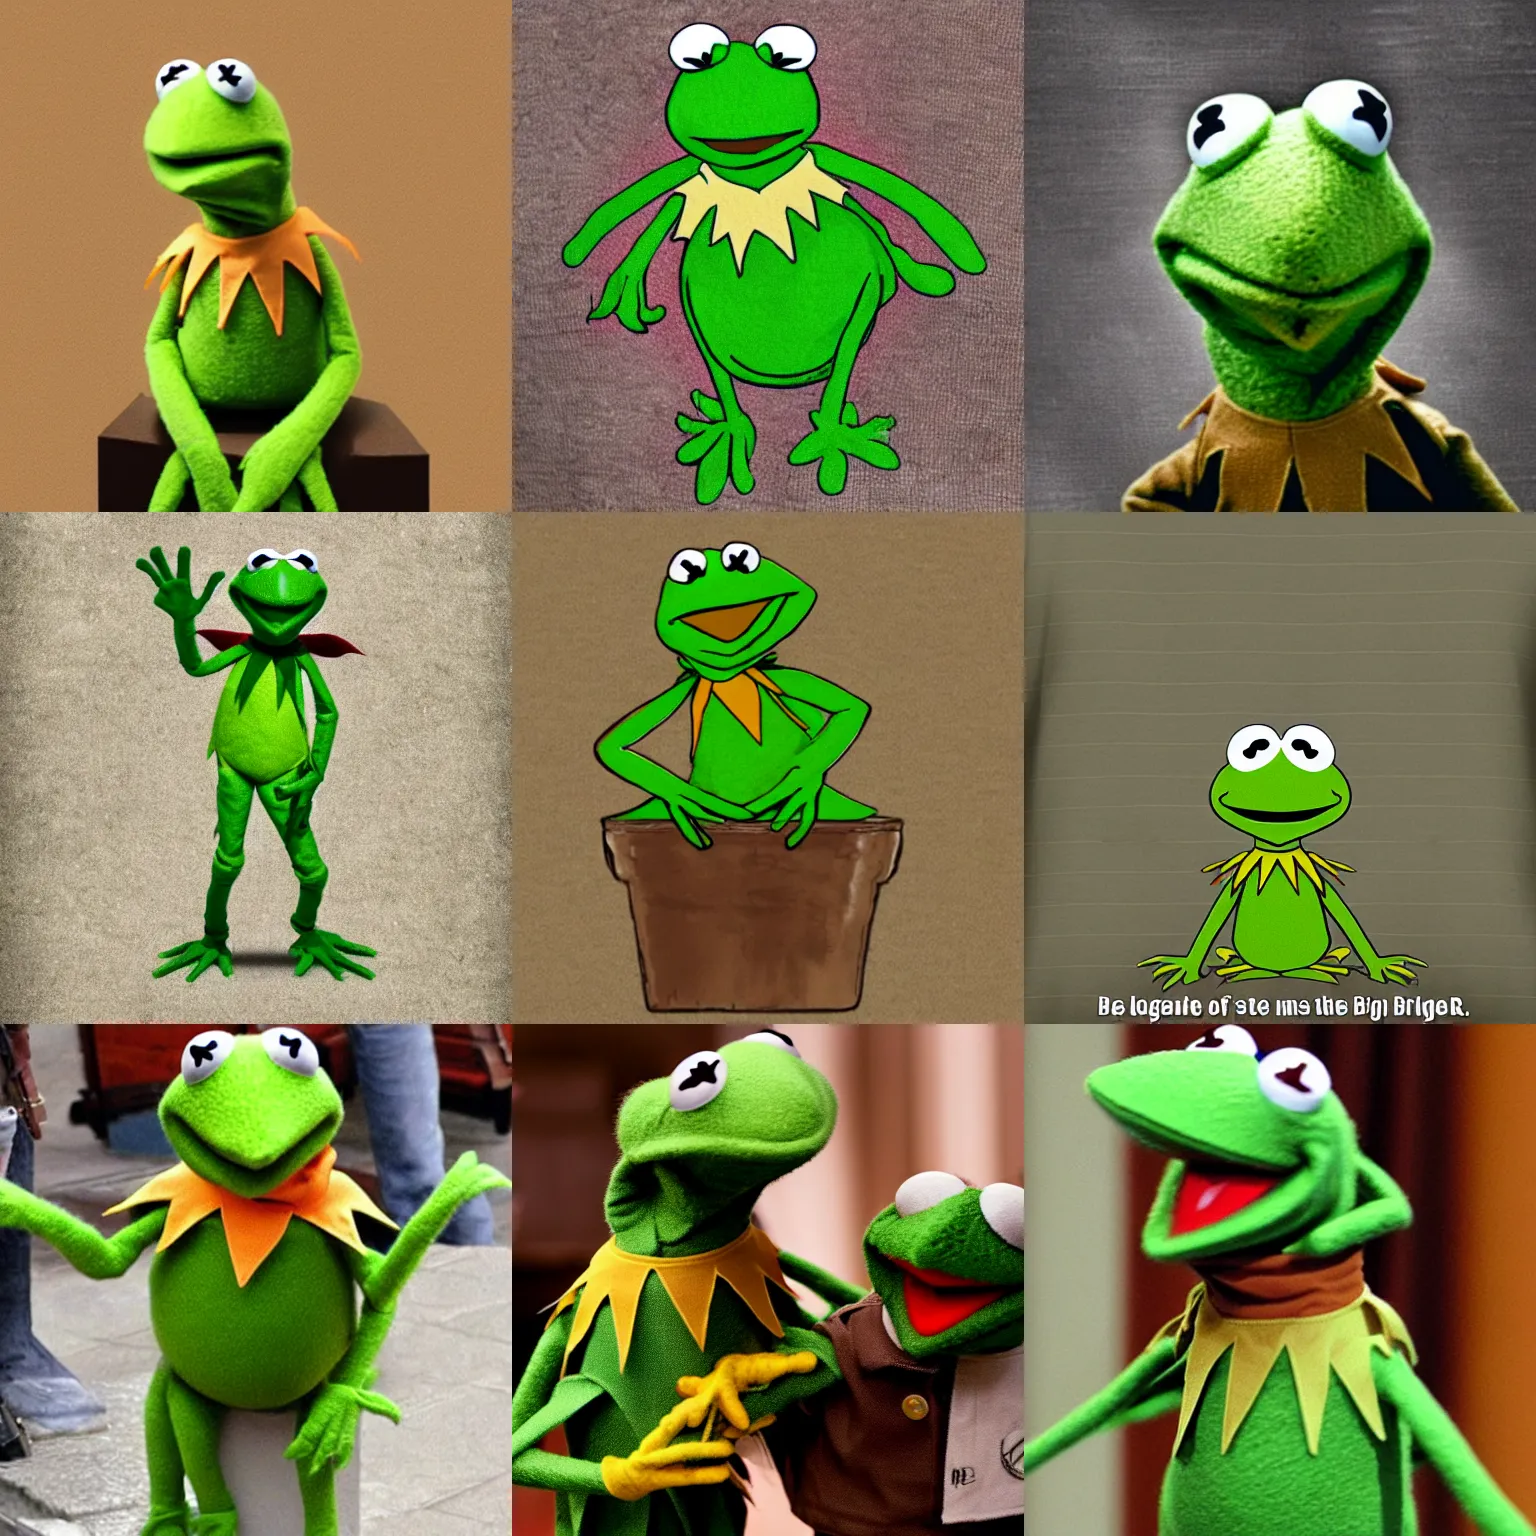 Prompt: Kermit the frog as Big Boss